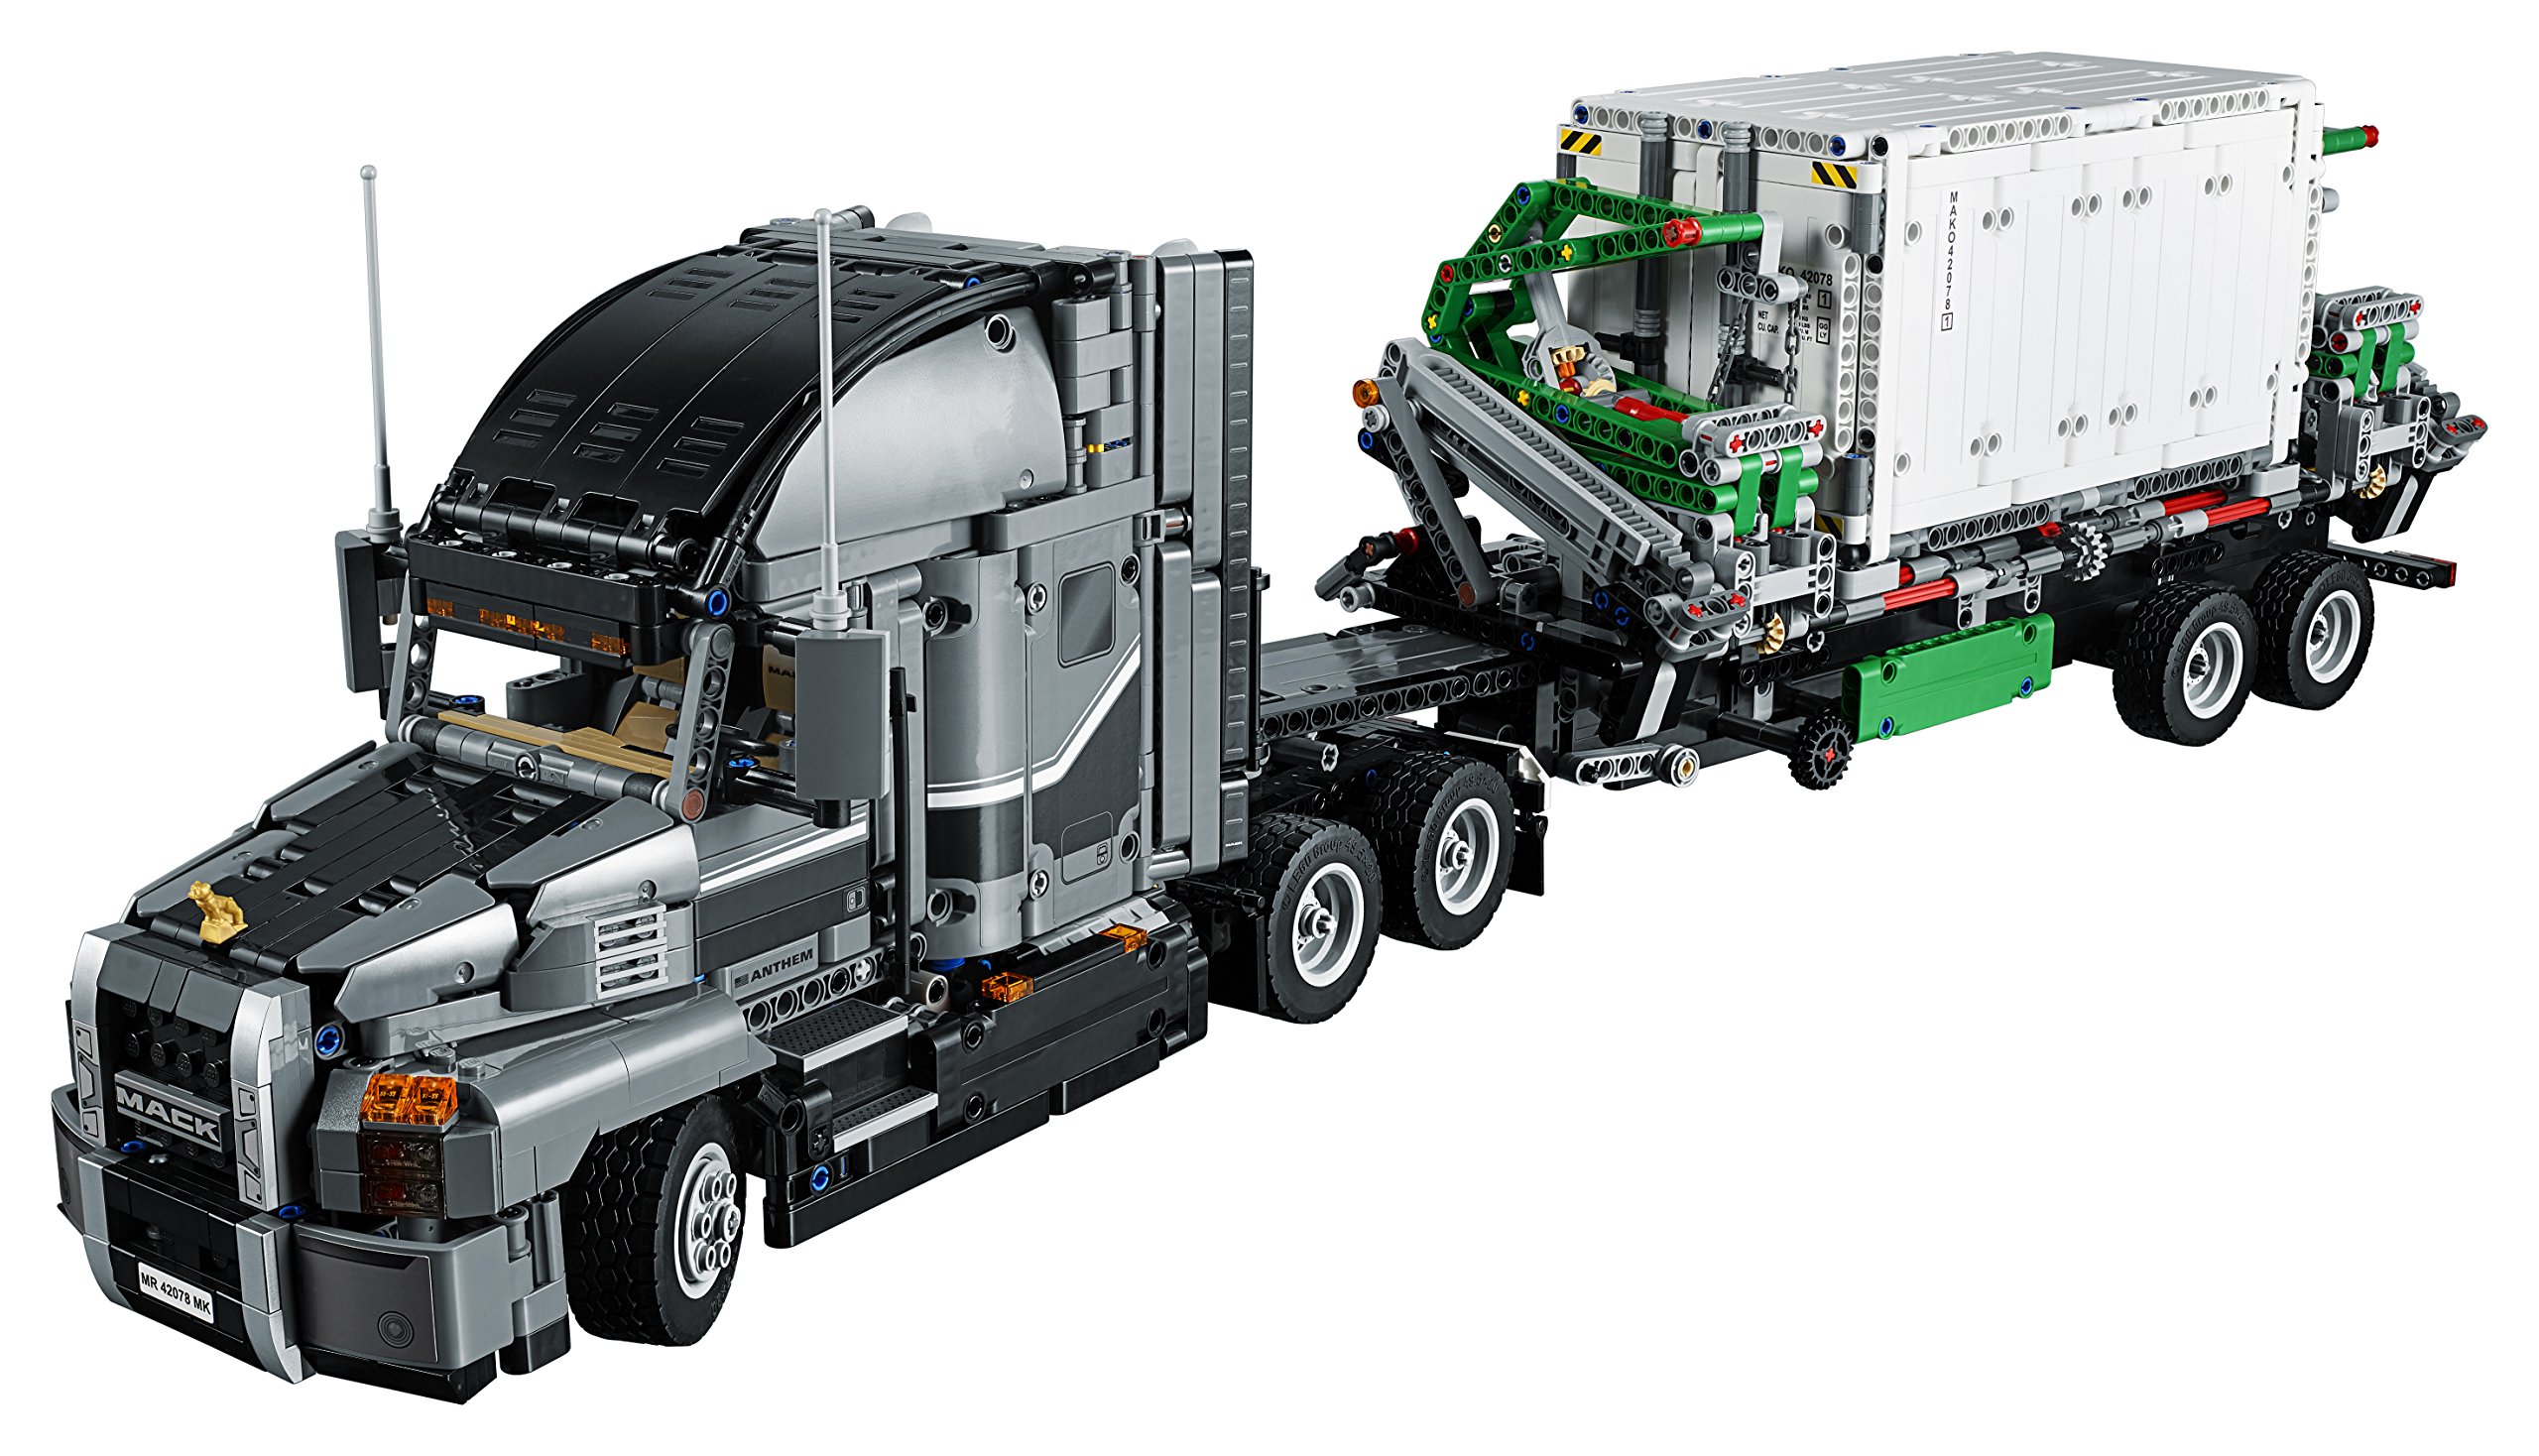 LEGO Technic Mack Anthem 42078 Semi Truck Building Kit and Engineering Toy for Kids and Teenagers, Top Gifts for Boys (2595 Pieces) (Discontinued by Manufacturer)